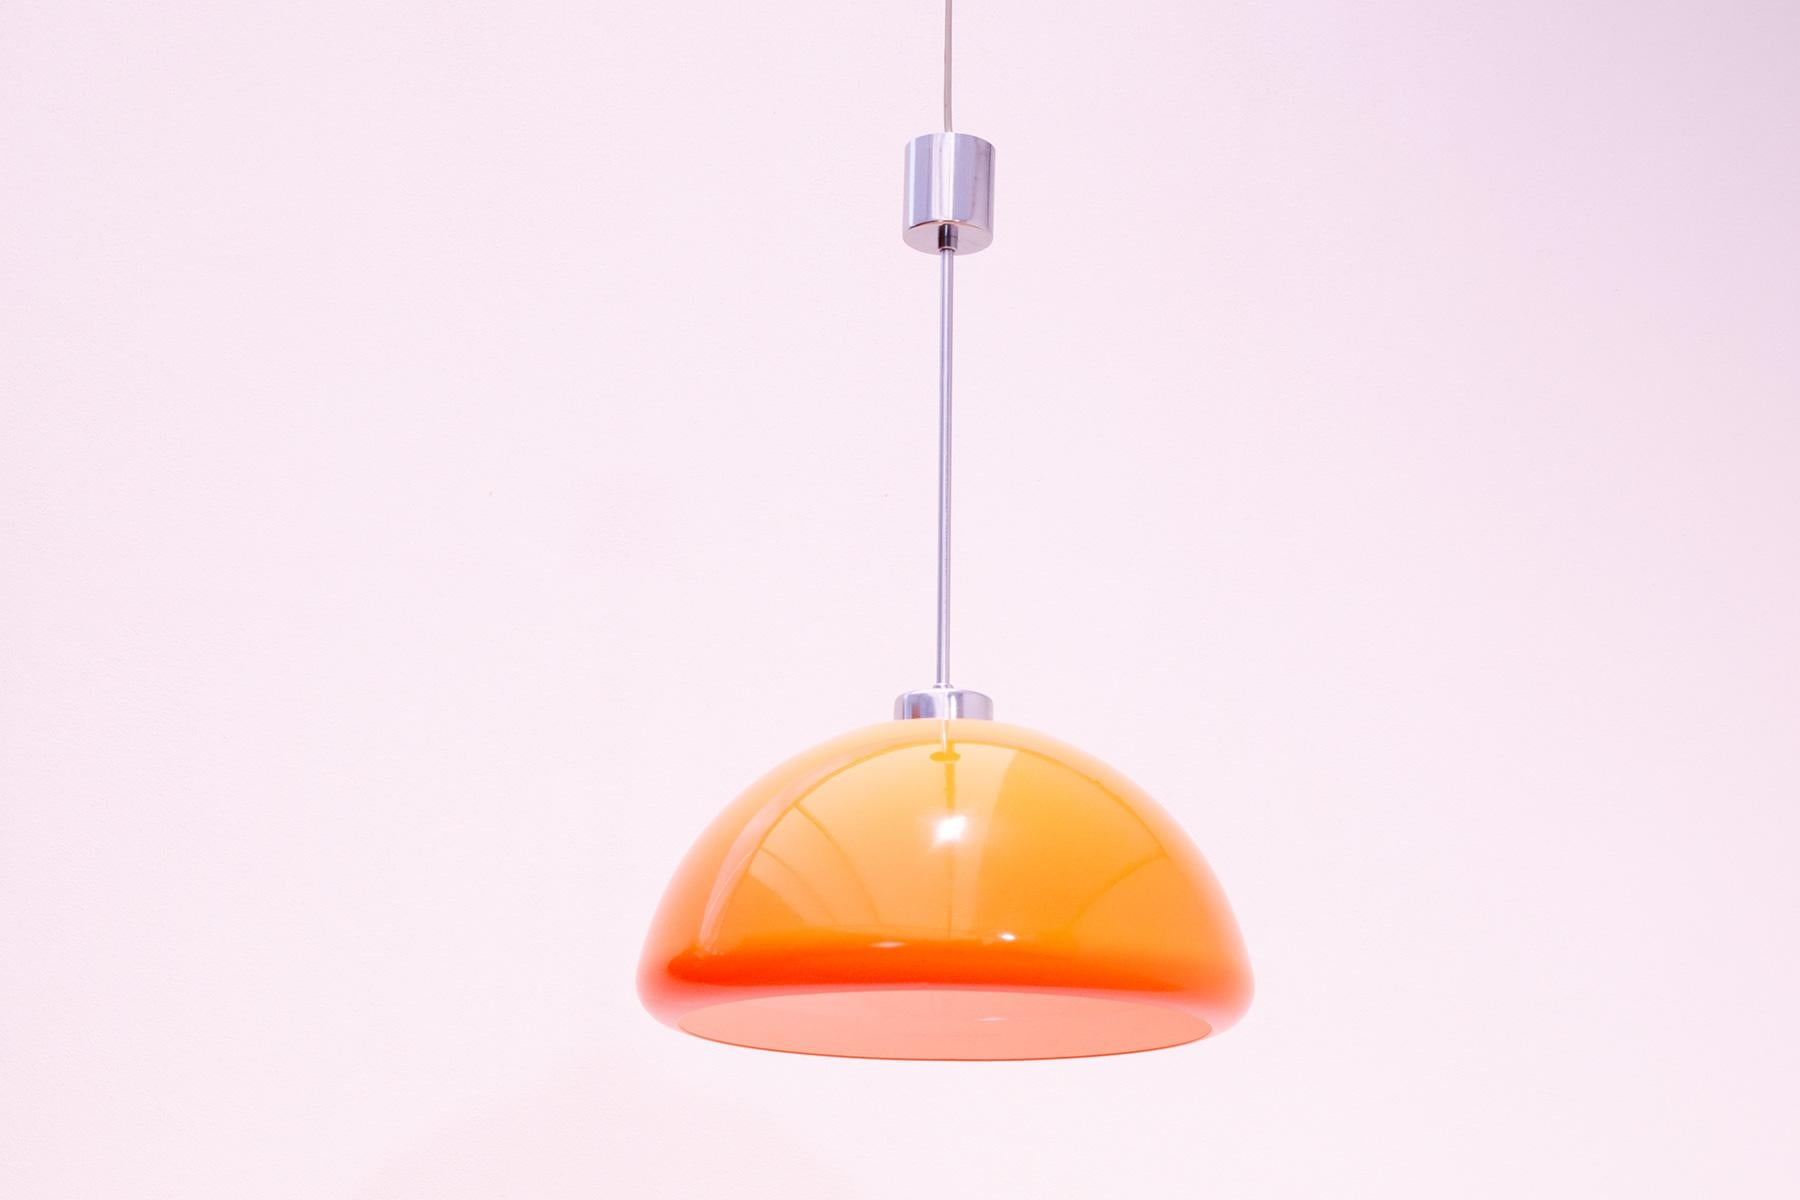 Harvey Guzzini Space-age pendant lamp, circa late early 1970s. It was produced by Meplo company. Signed on the shade.
In good working order and in very good condition. The plastic shade has no damage, is bright and clean, the chrome is in good